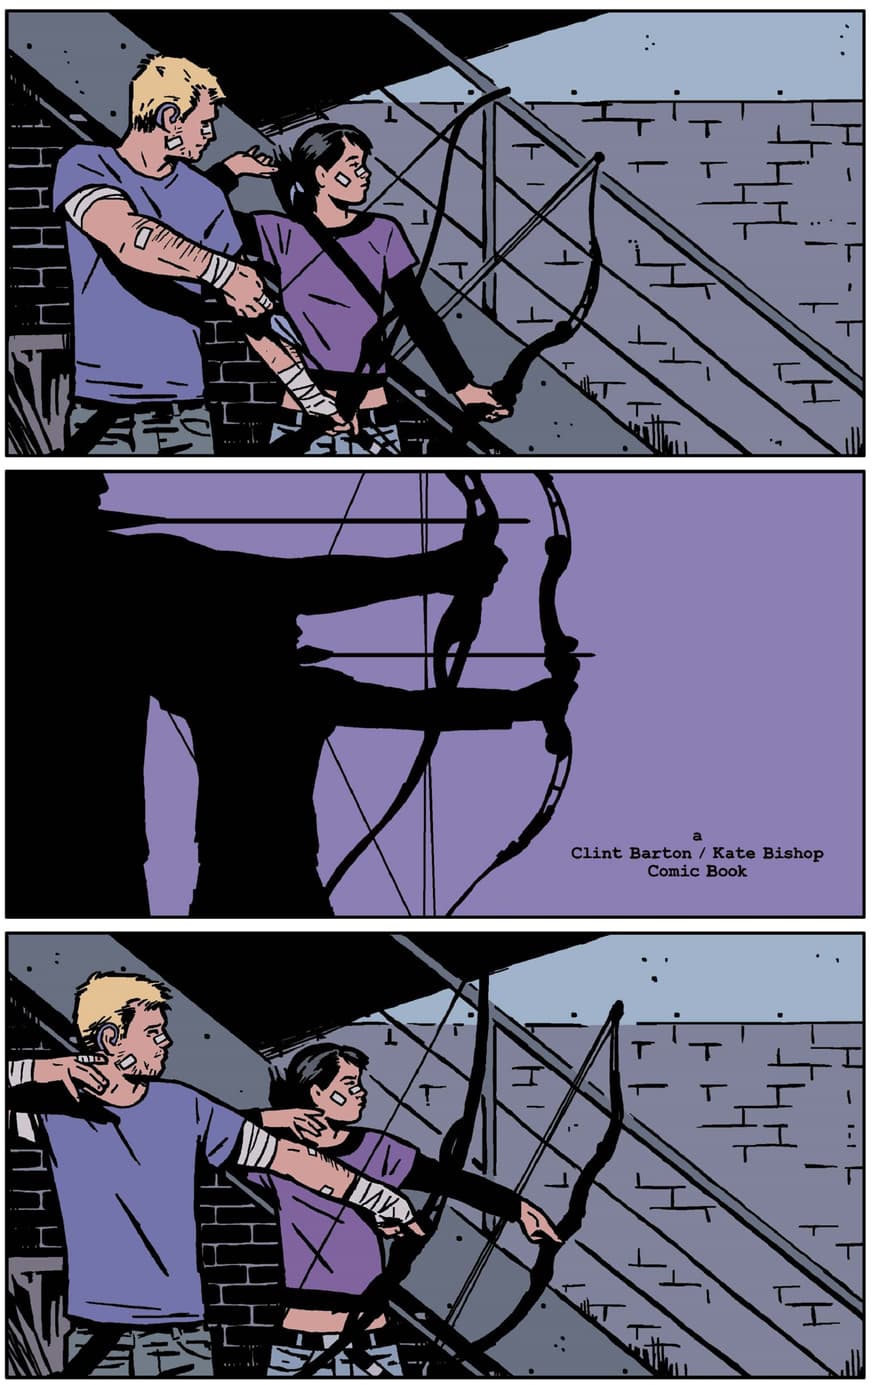 Clint and Kate practice their target practice in HAWKEYE (2012) #22.